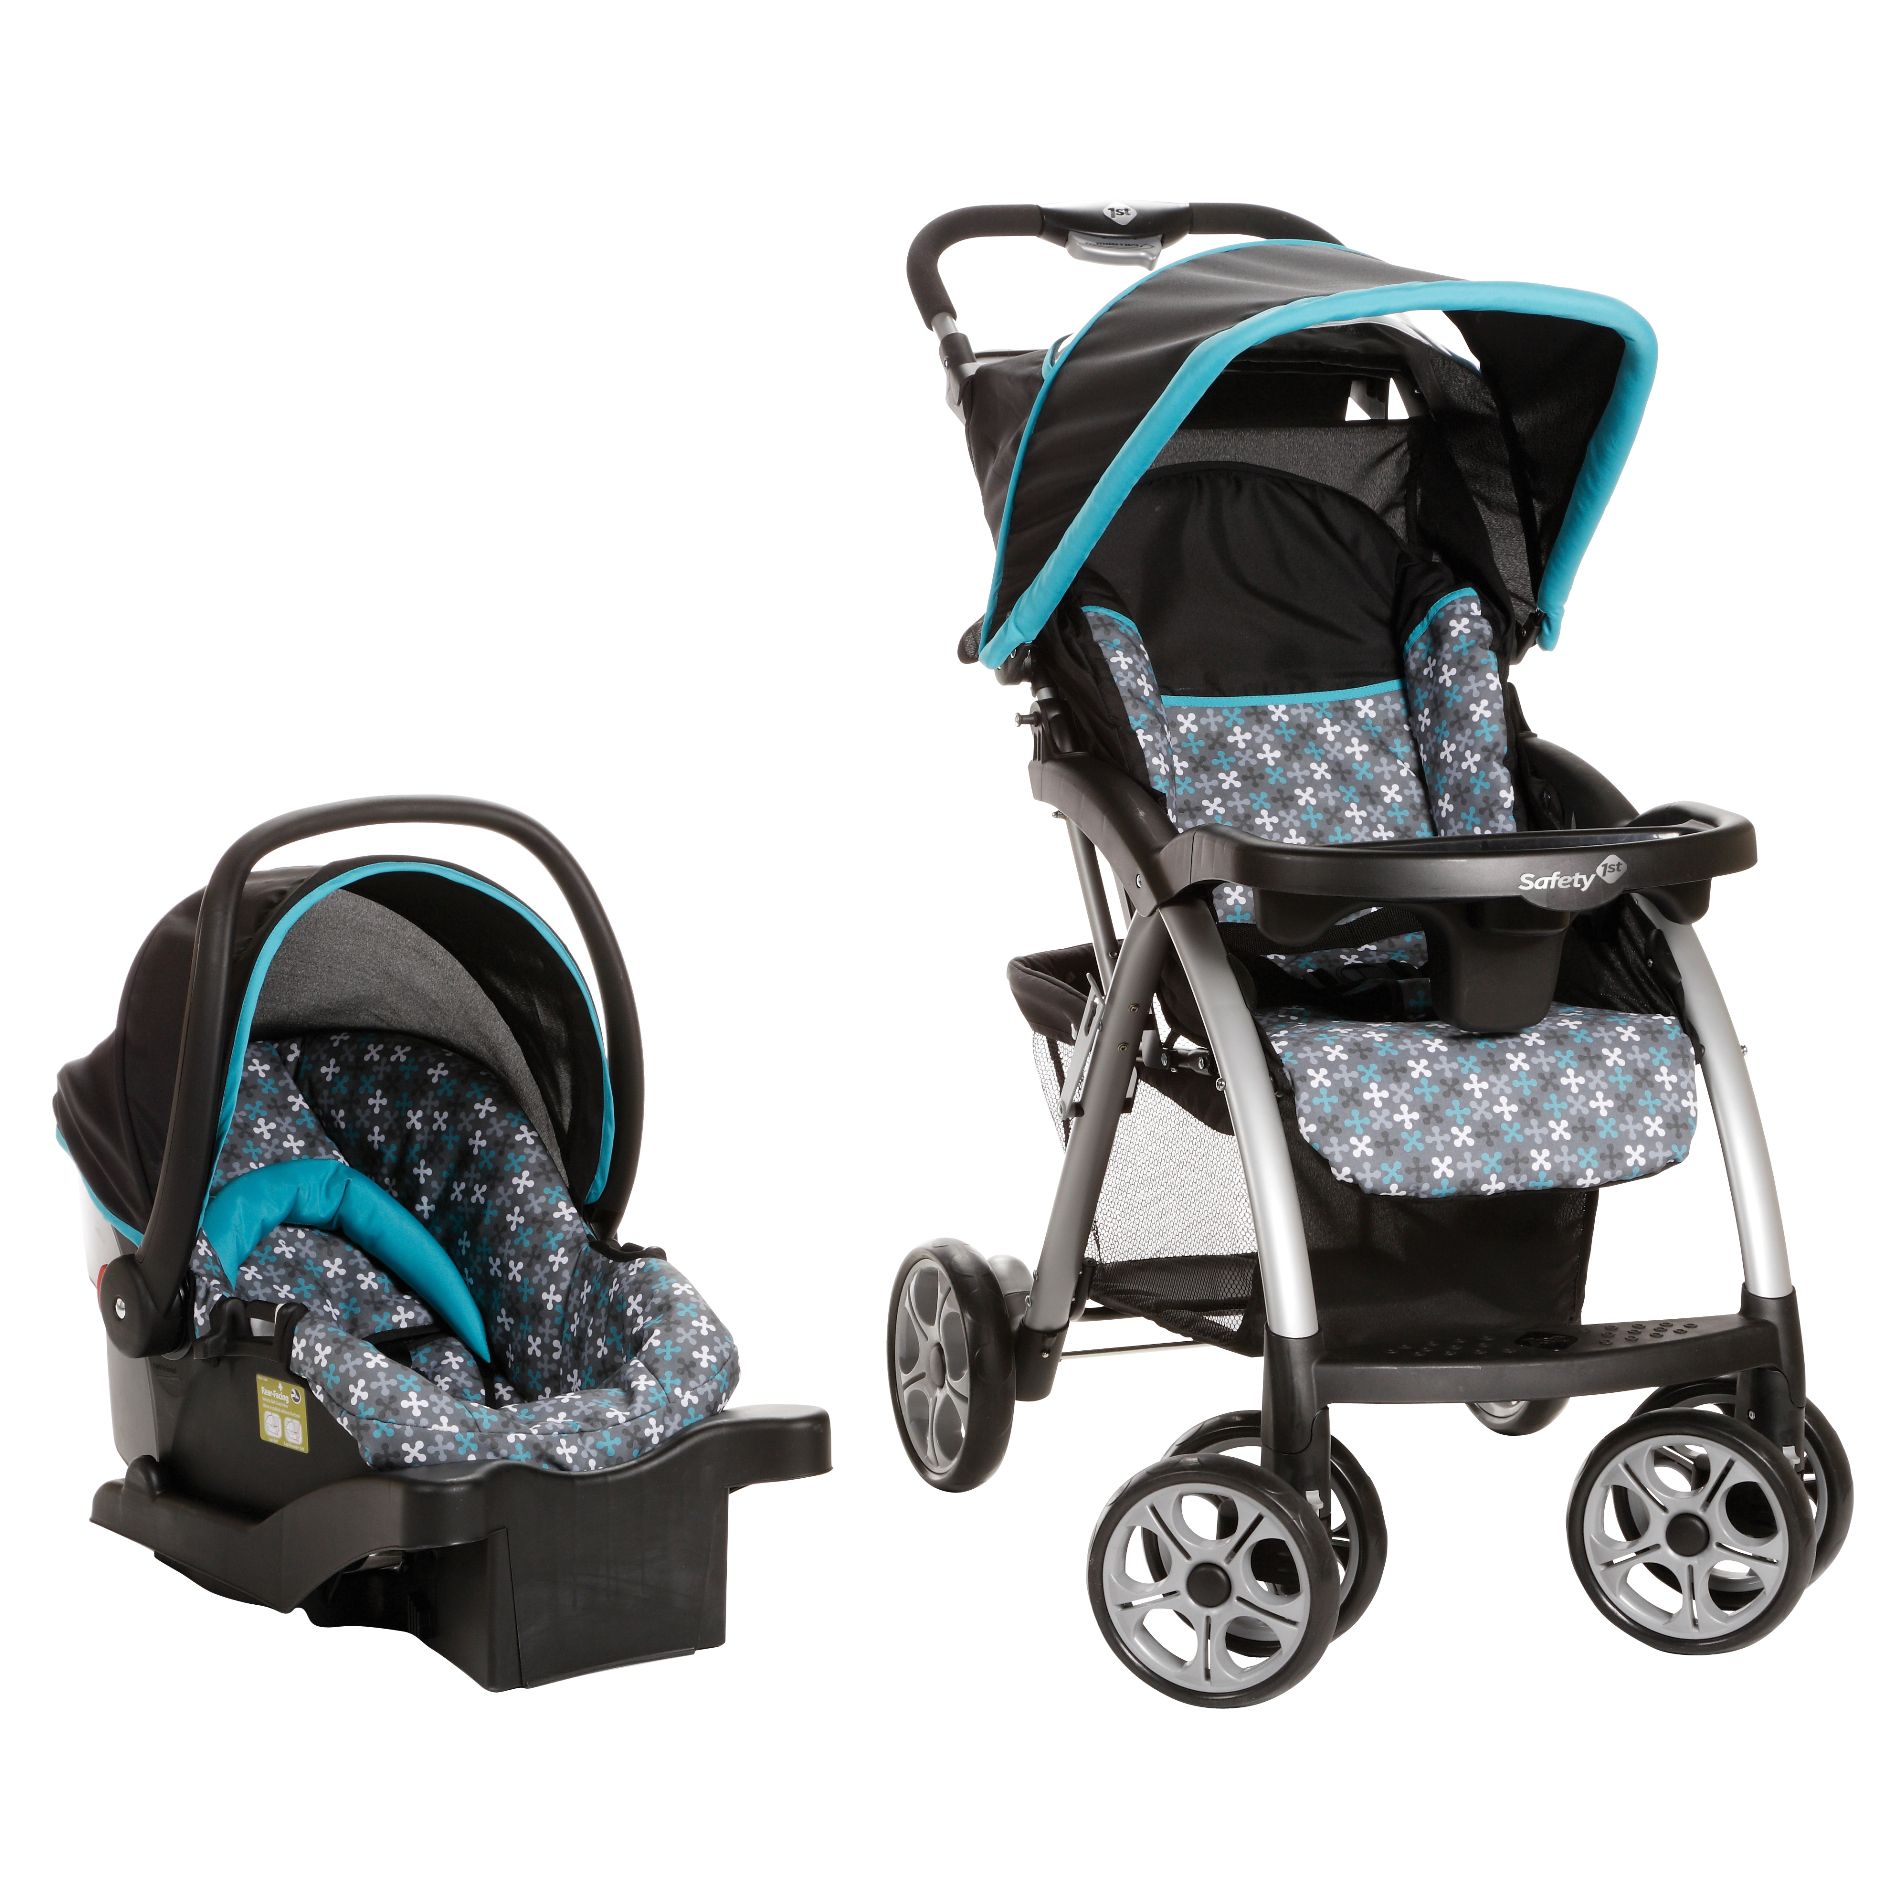 safety 1st stroller carseat combo instructions